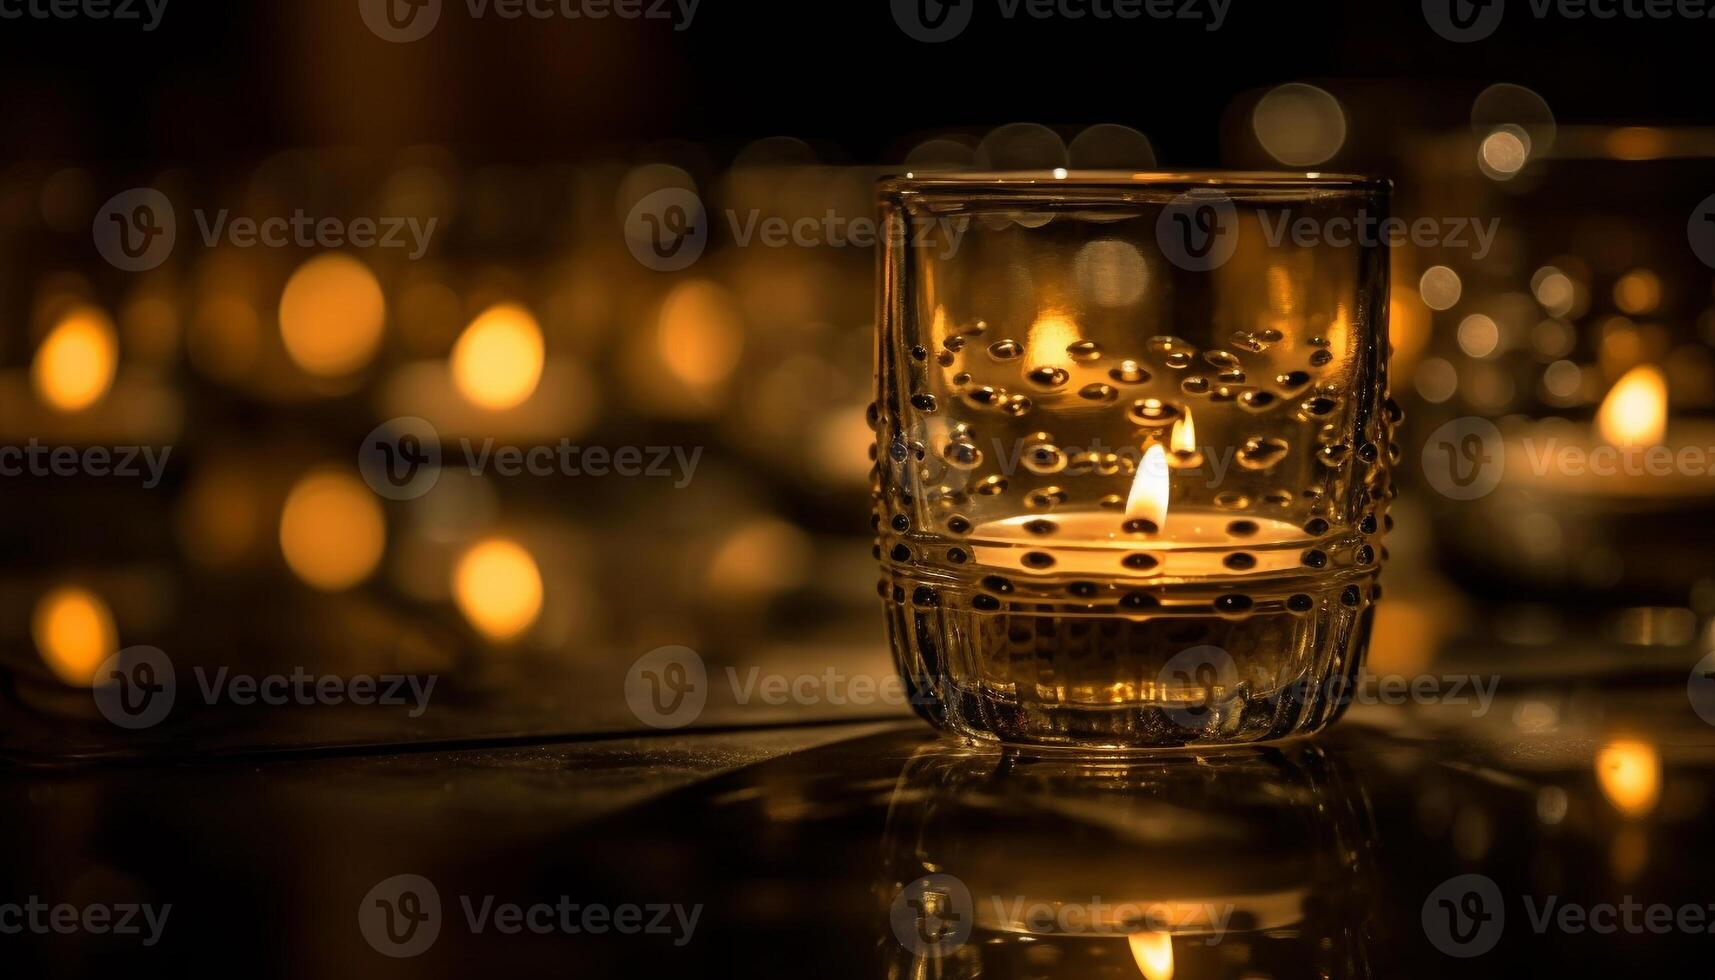 The glowing candle illuminates the tranquil scene with elegance and spirituality generated by AI photo